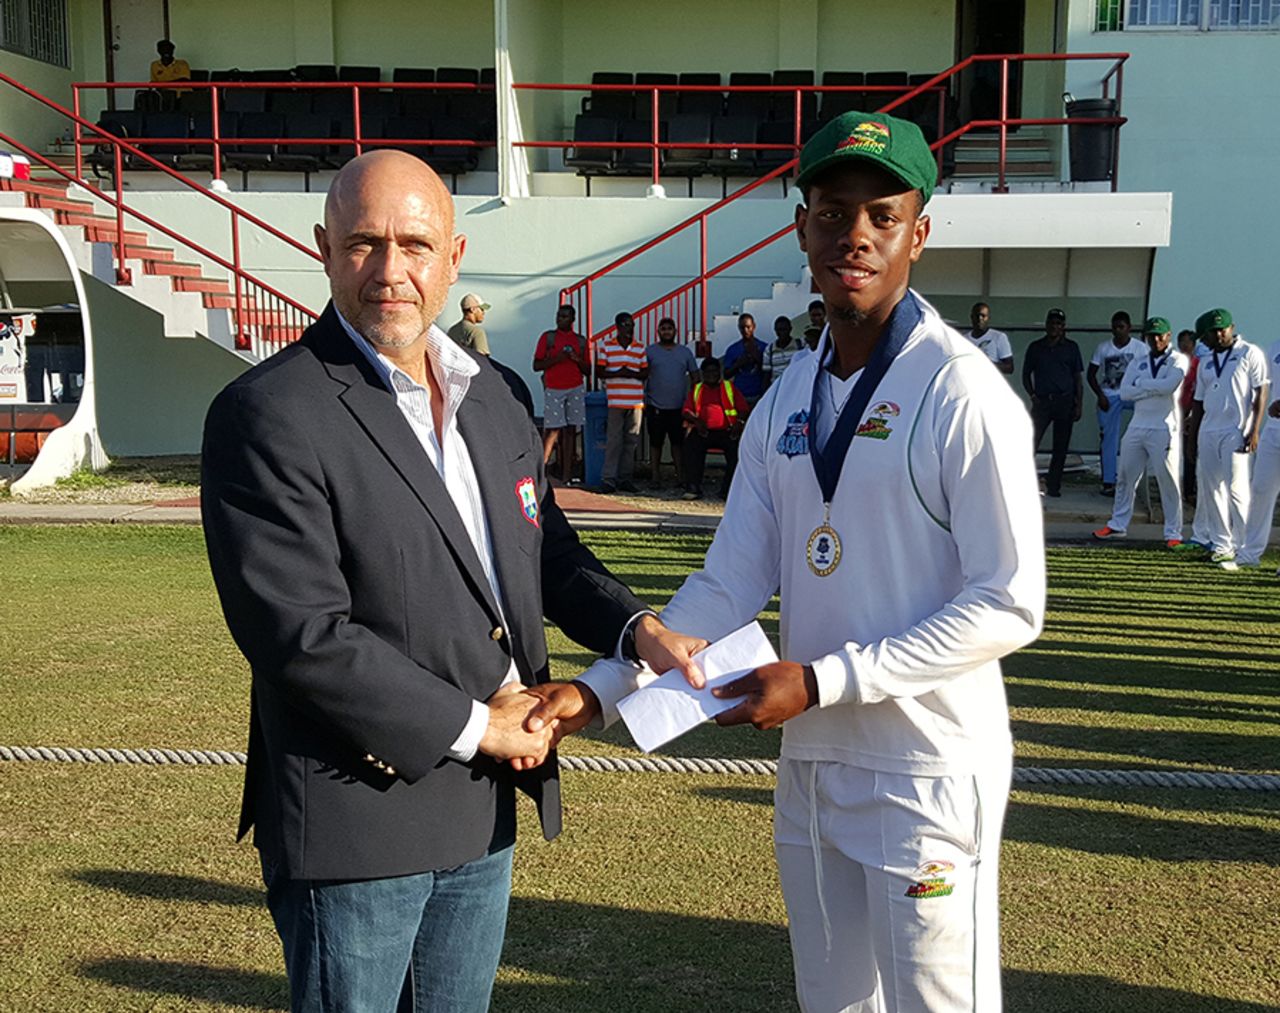 Shimron Hetmyer was named Man of the Match for his 107 in the first innings, Guyana v Jamaica, Regional 4-day Tournament, 3rd day, Providence, March 20, 2016